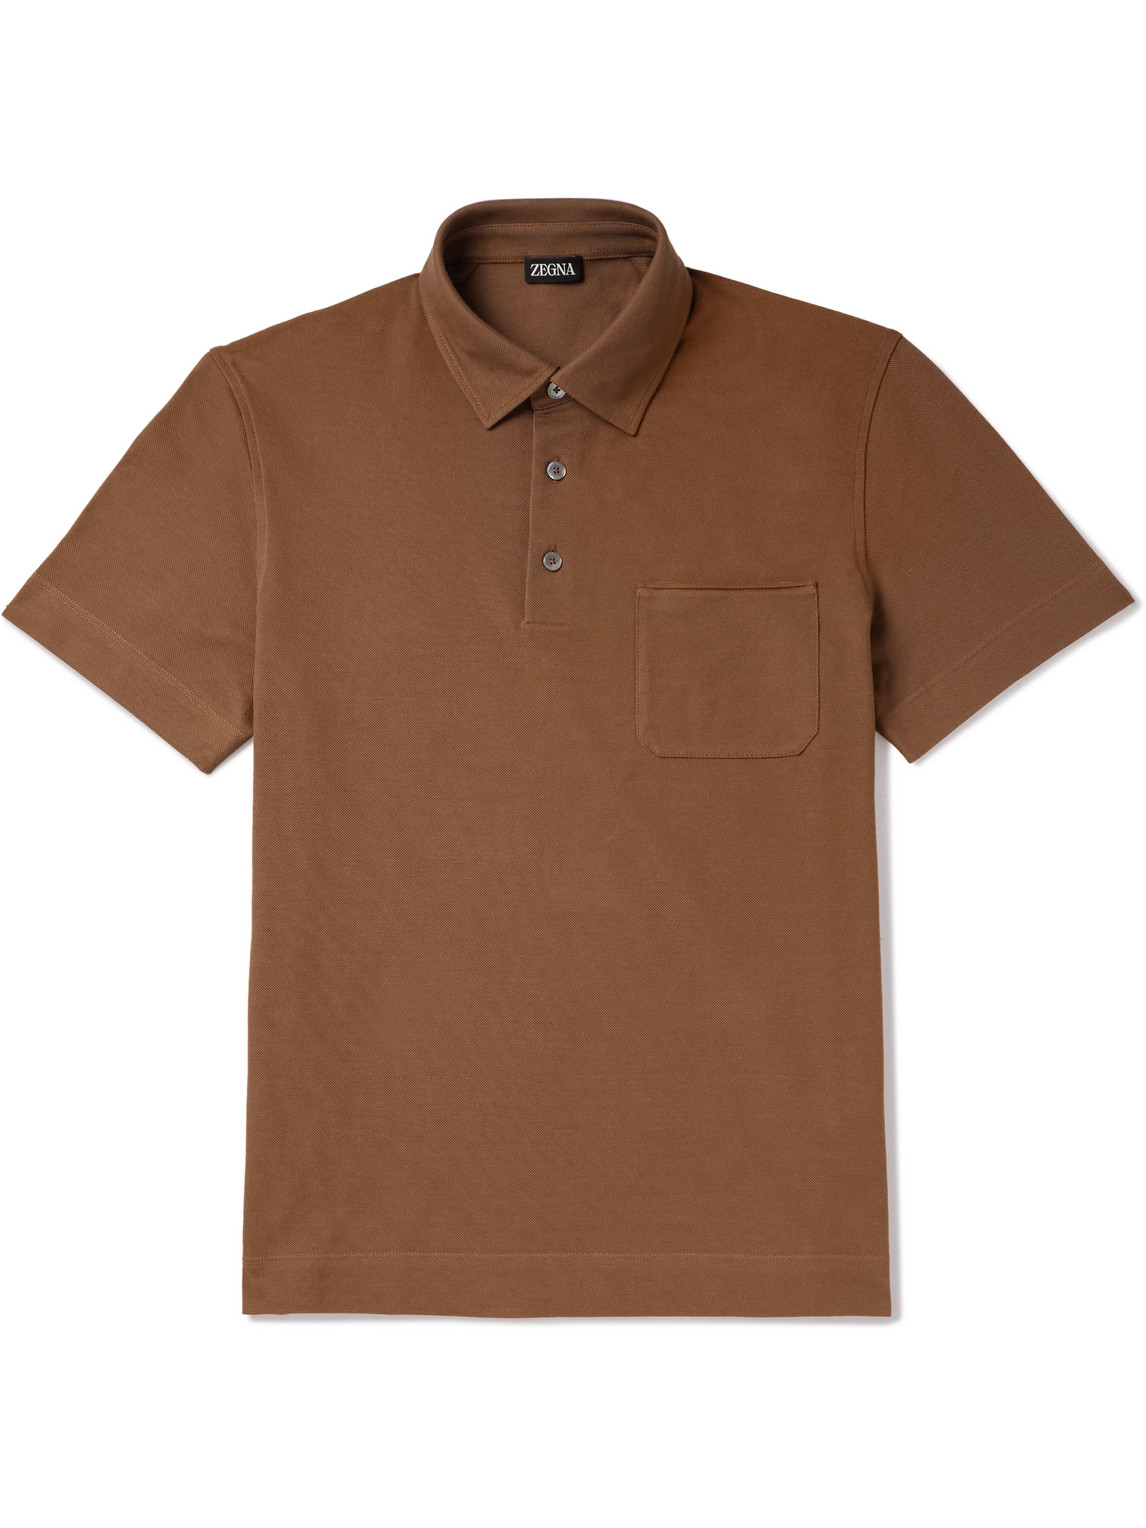 Zegna Leather-trimmed Cotton-piqué Polo Shirt In Brown